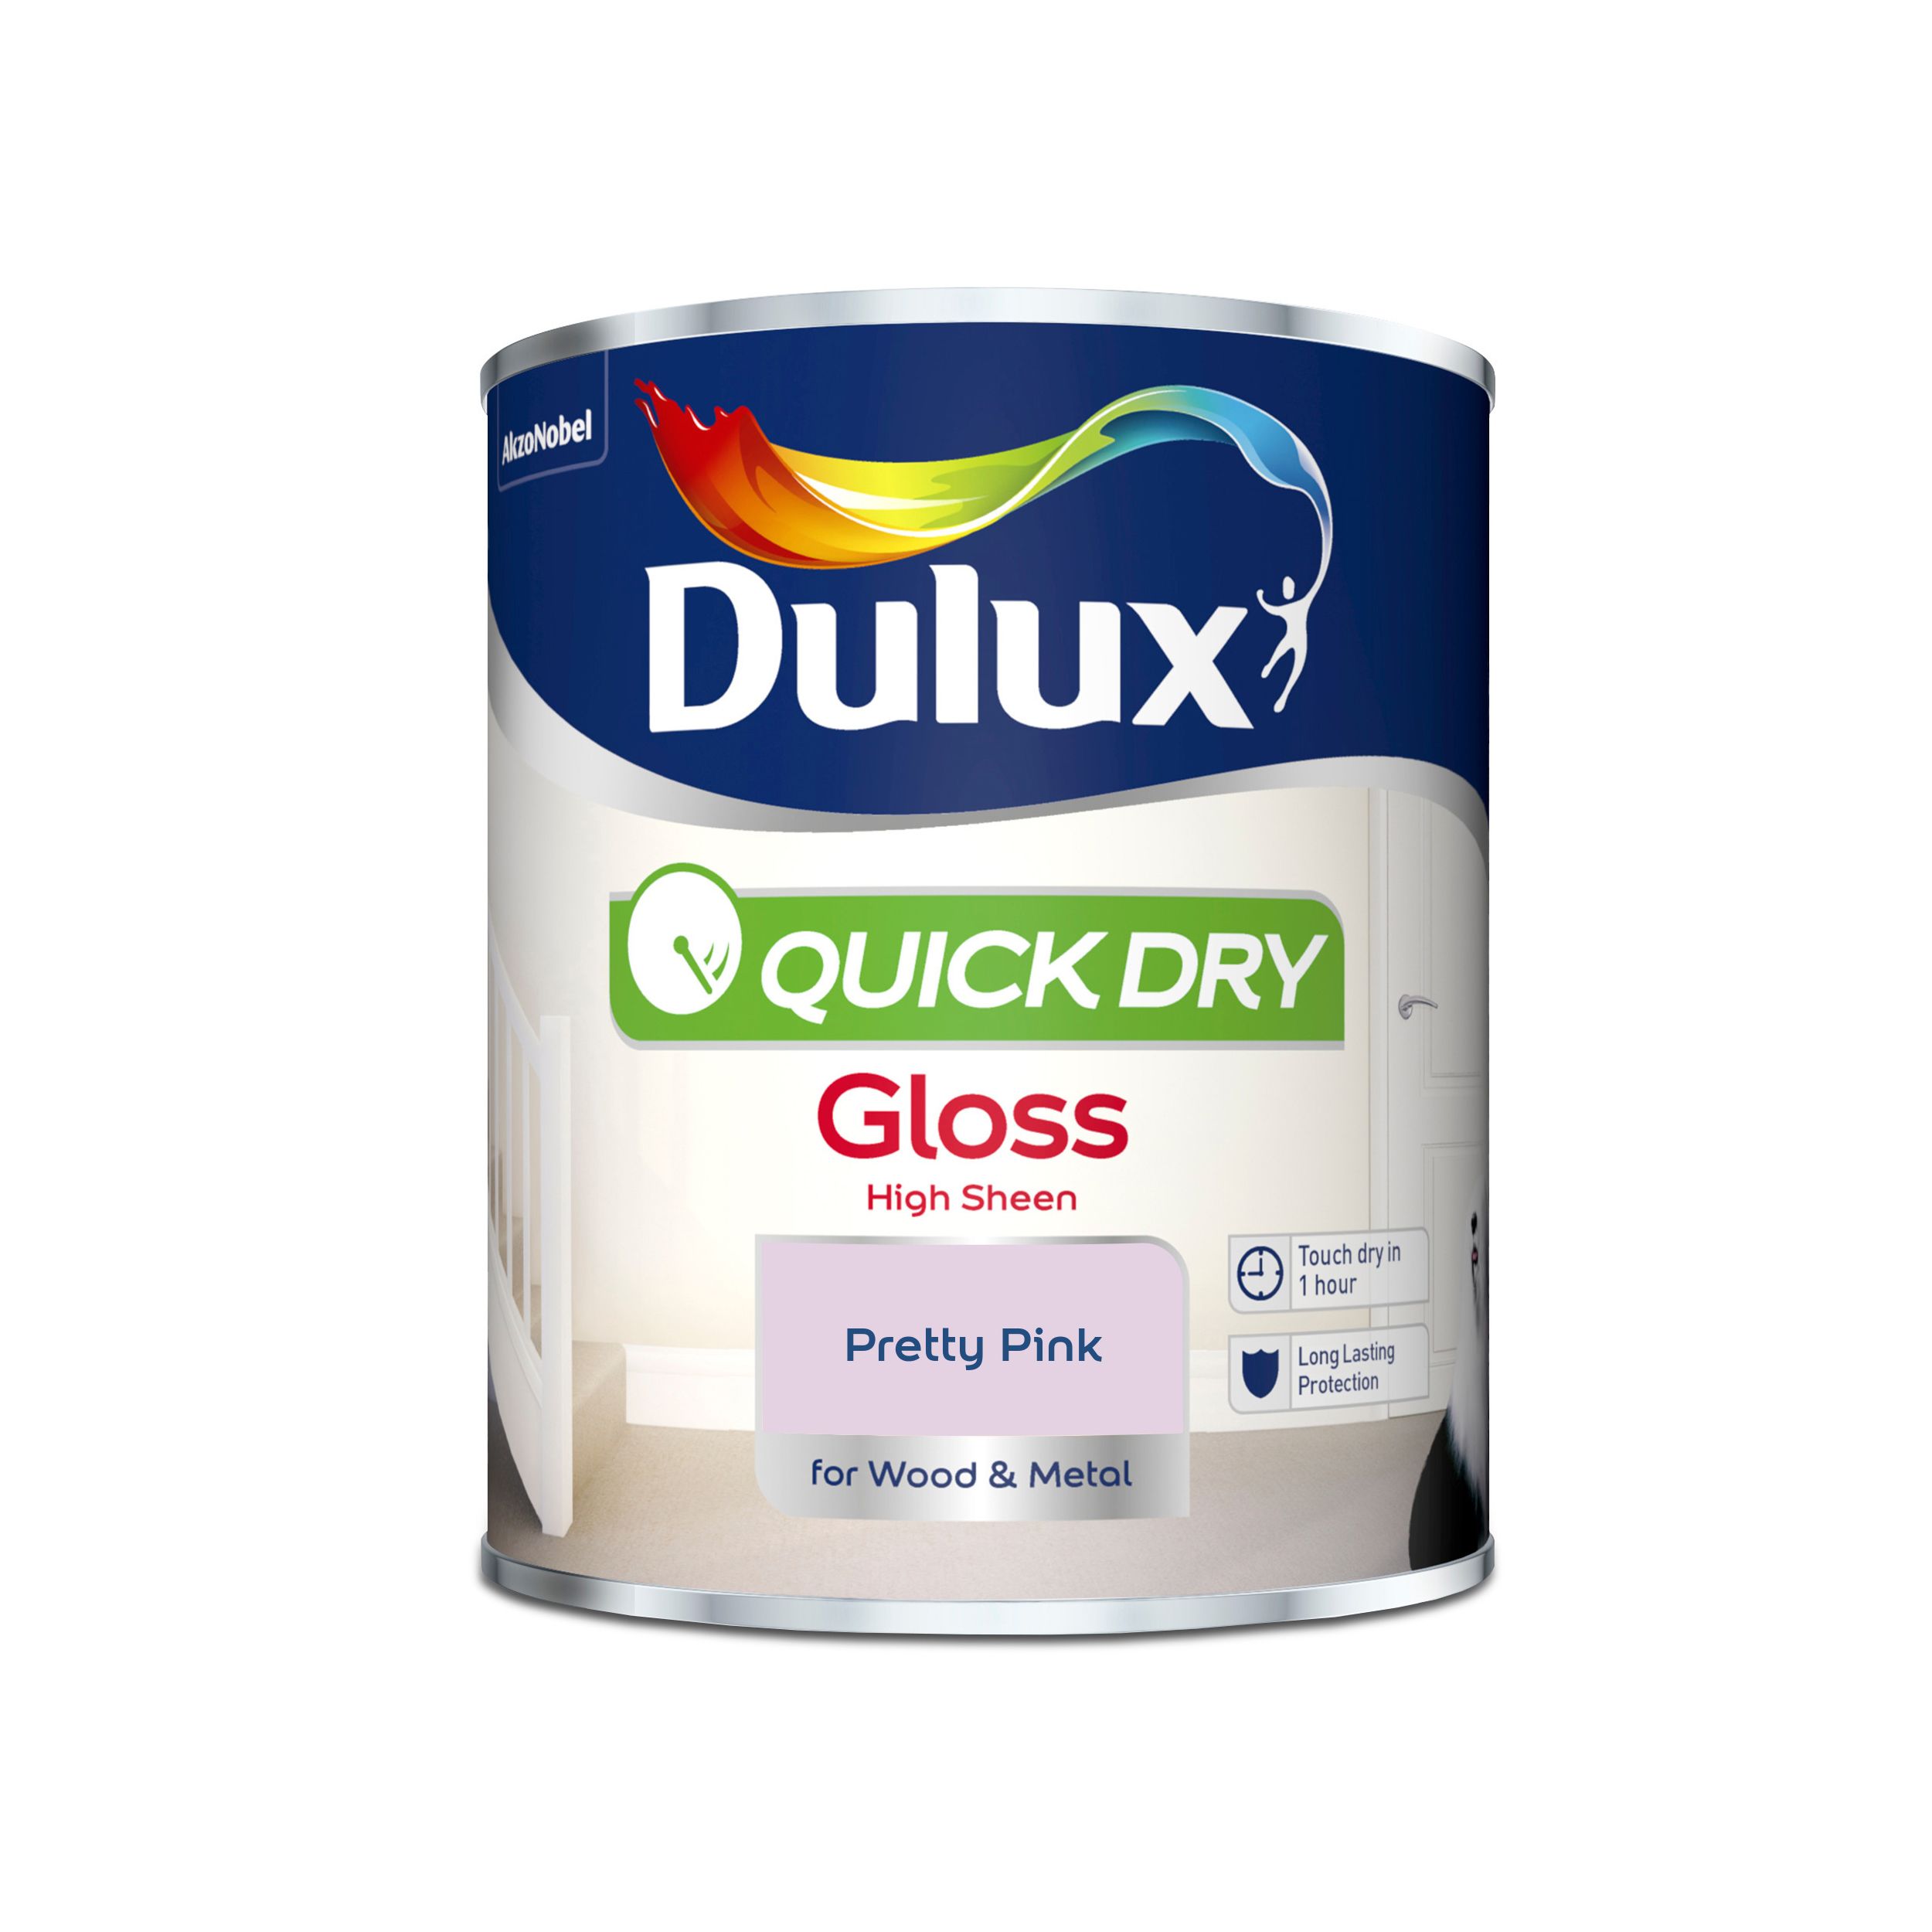 Dulux Quick dry Pretty pink Gloss Metal & wood paint, 750ml